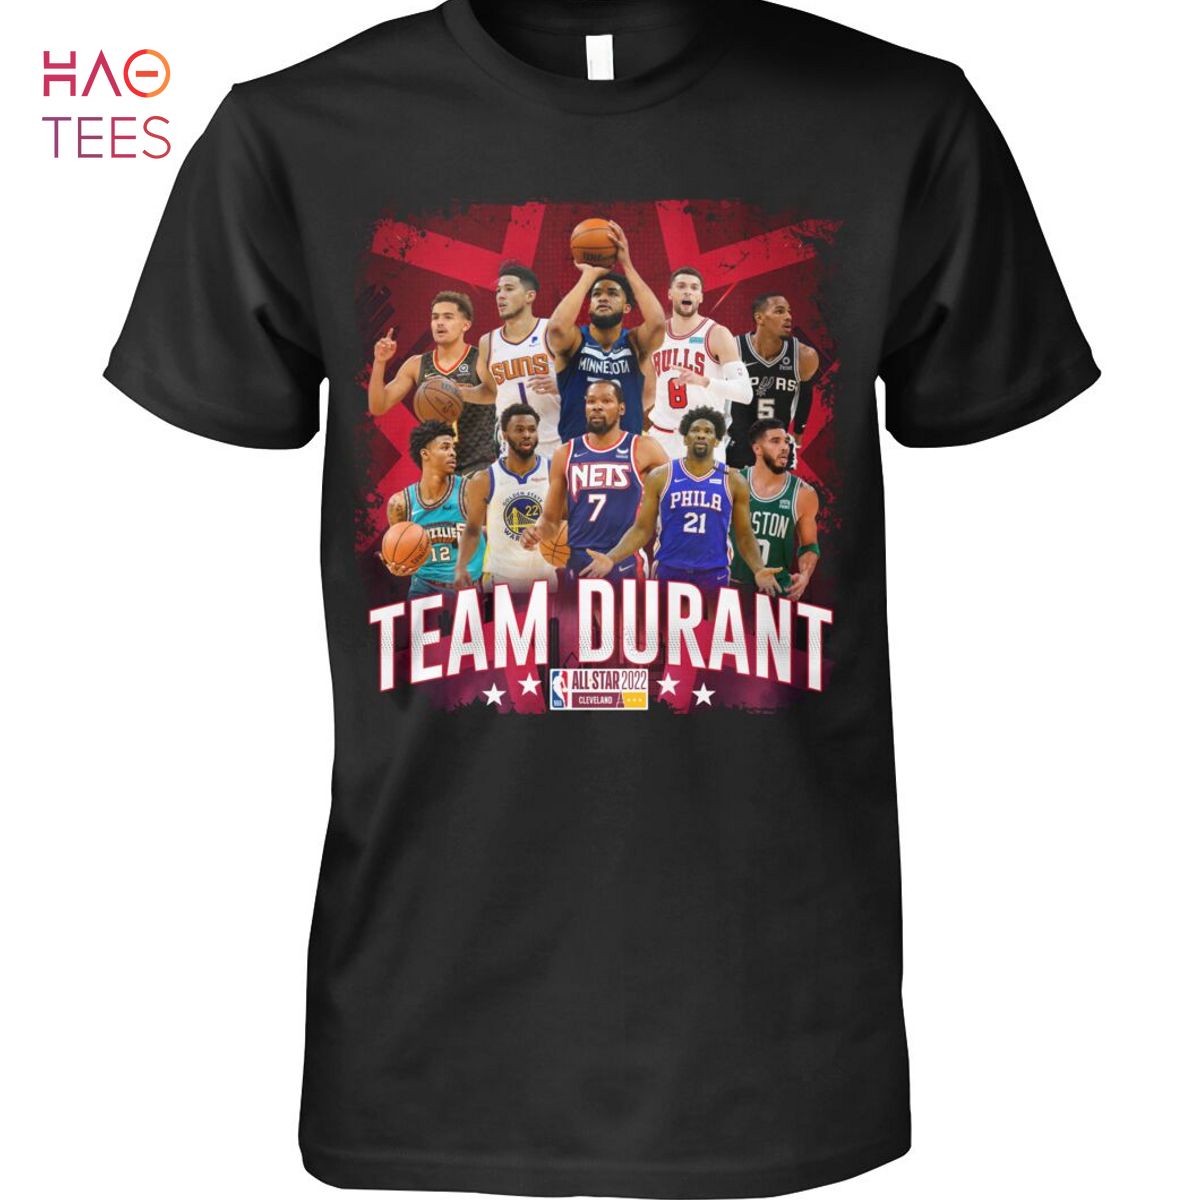 HOT Team Durant Shirt Limited Edition